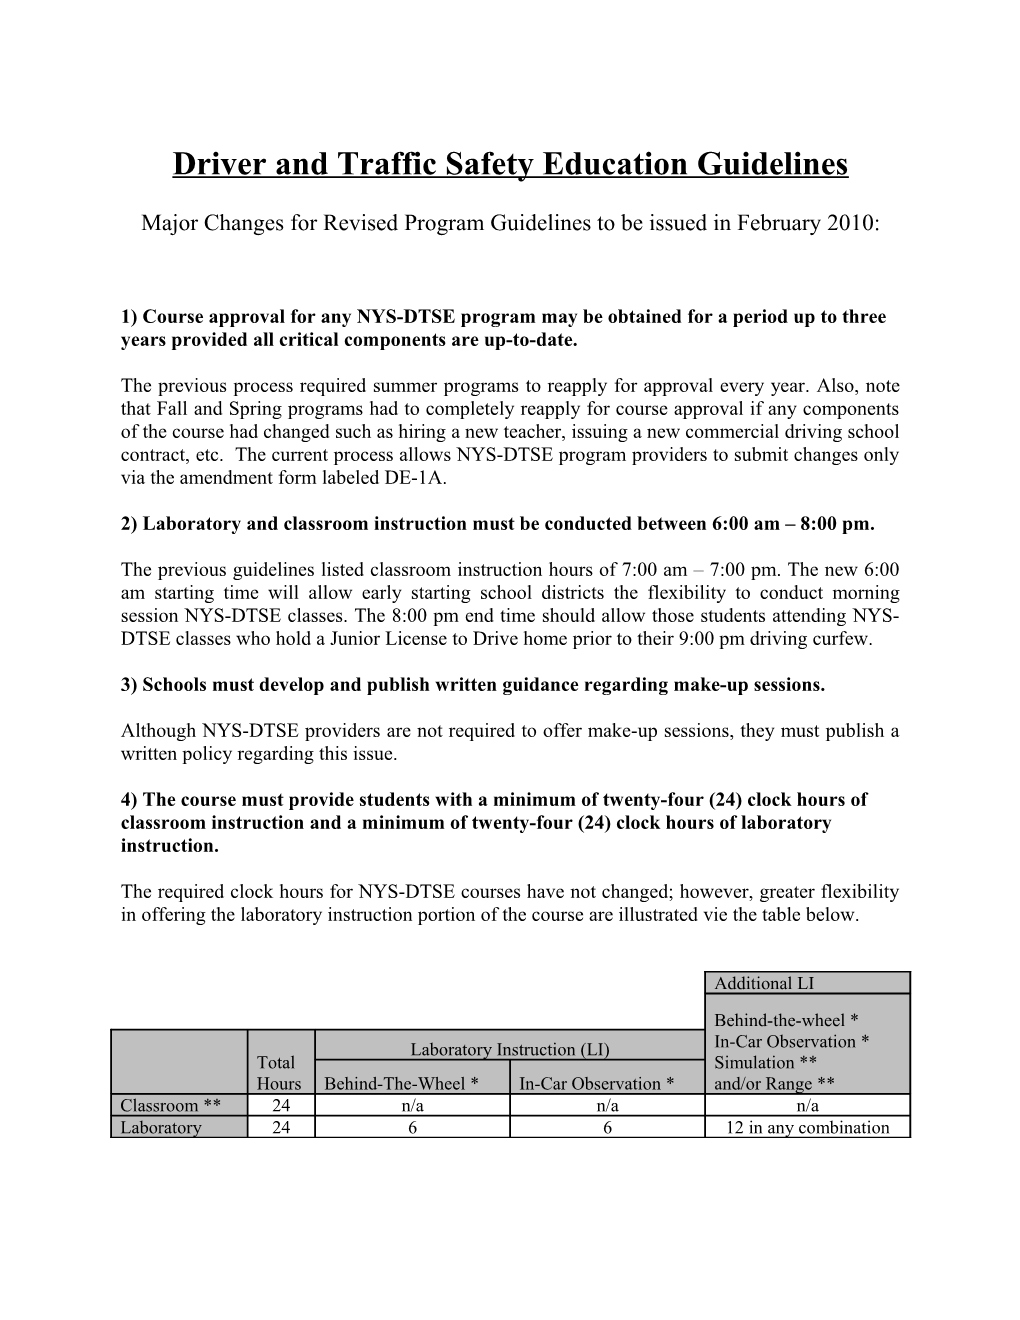 Driver and Traffic Safety Education Guidelines 2010